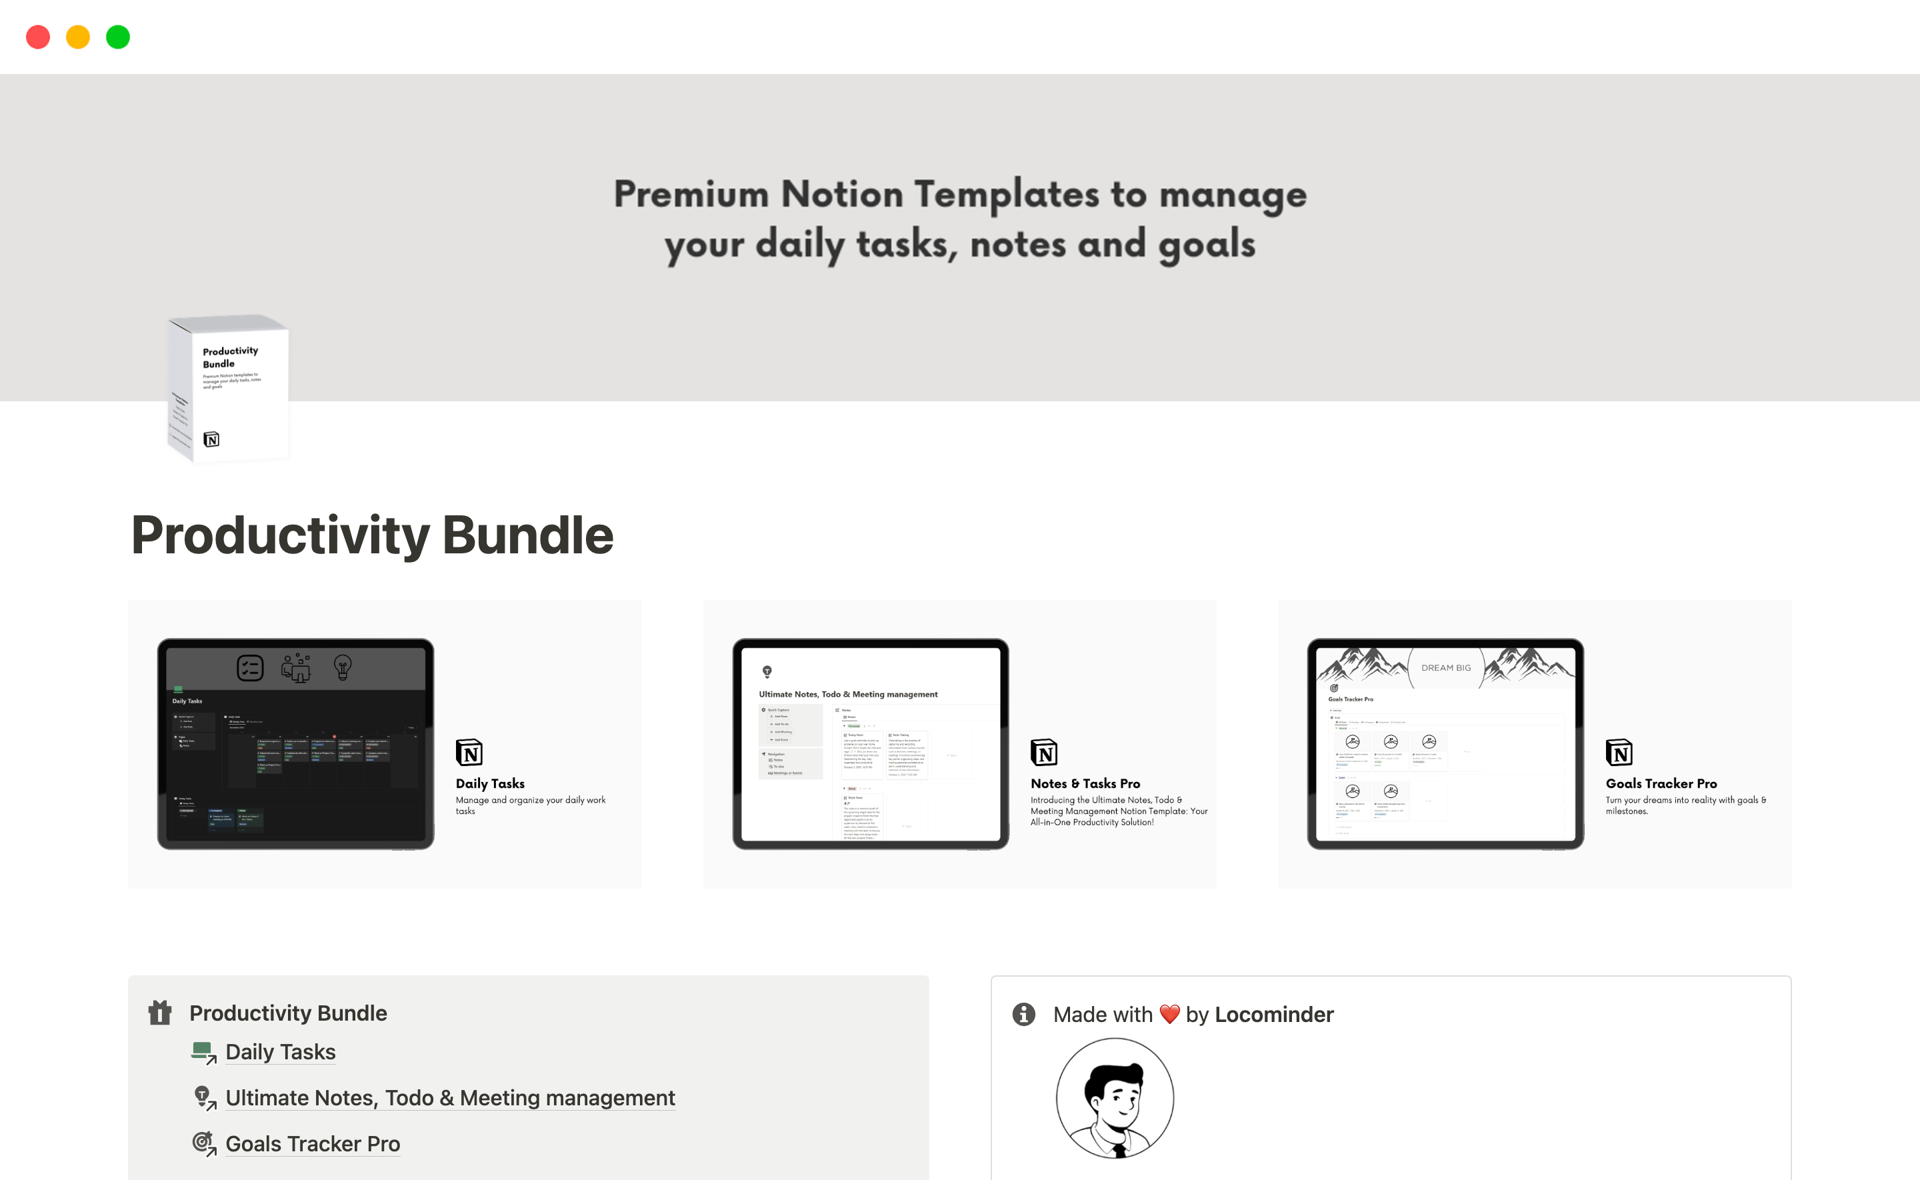 Premium Notion Templates to manage your daily tasks, notes and goals